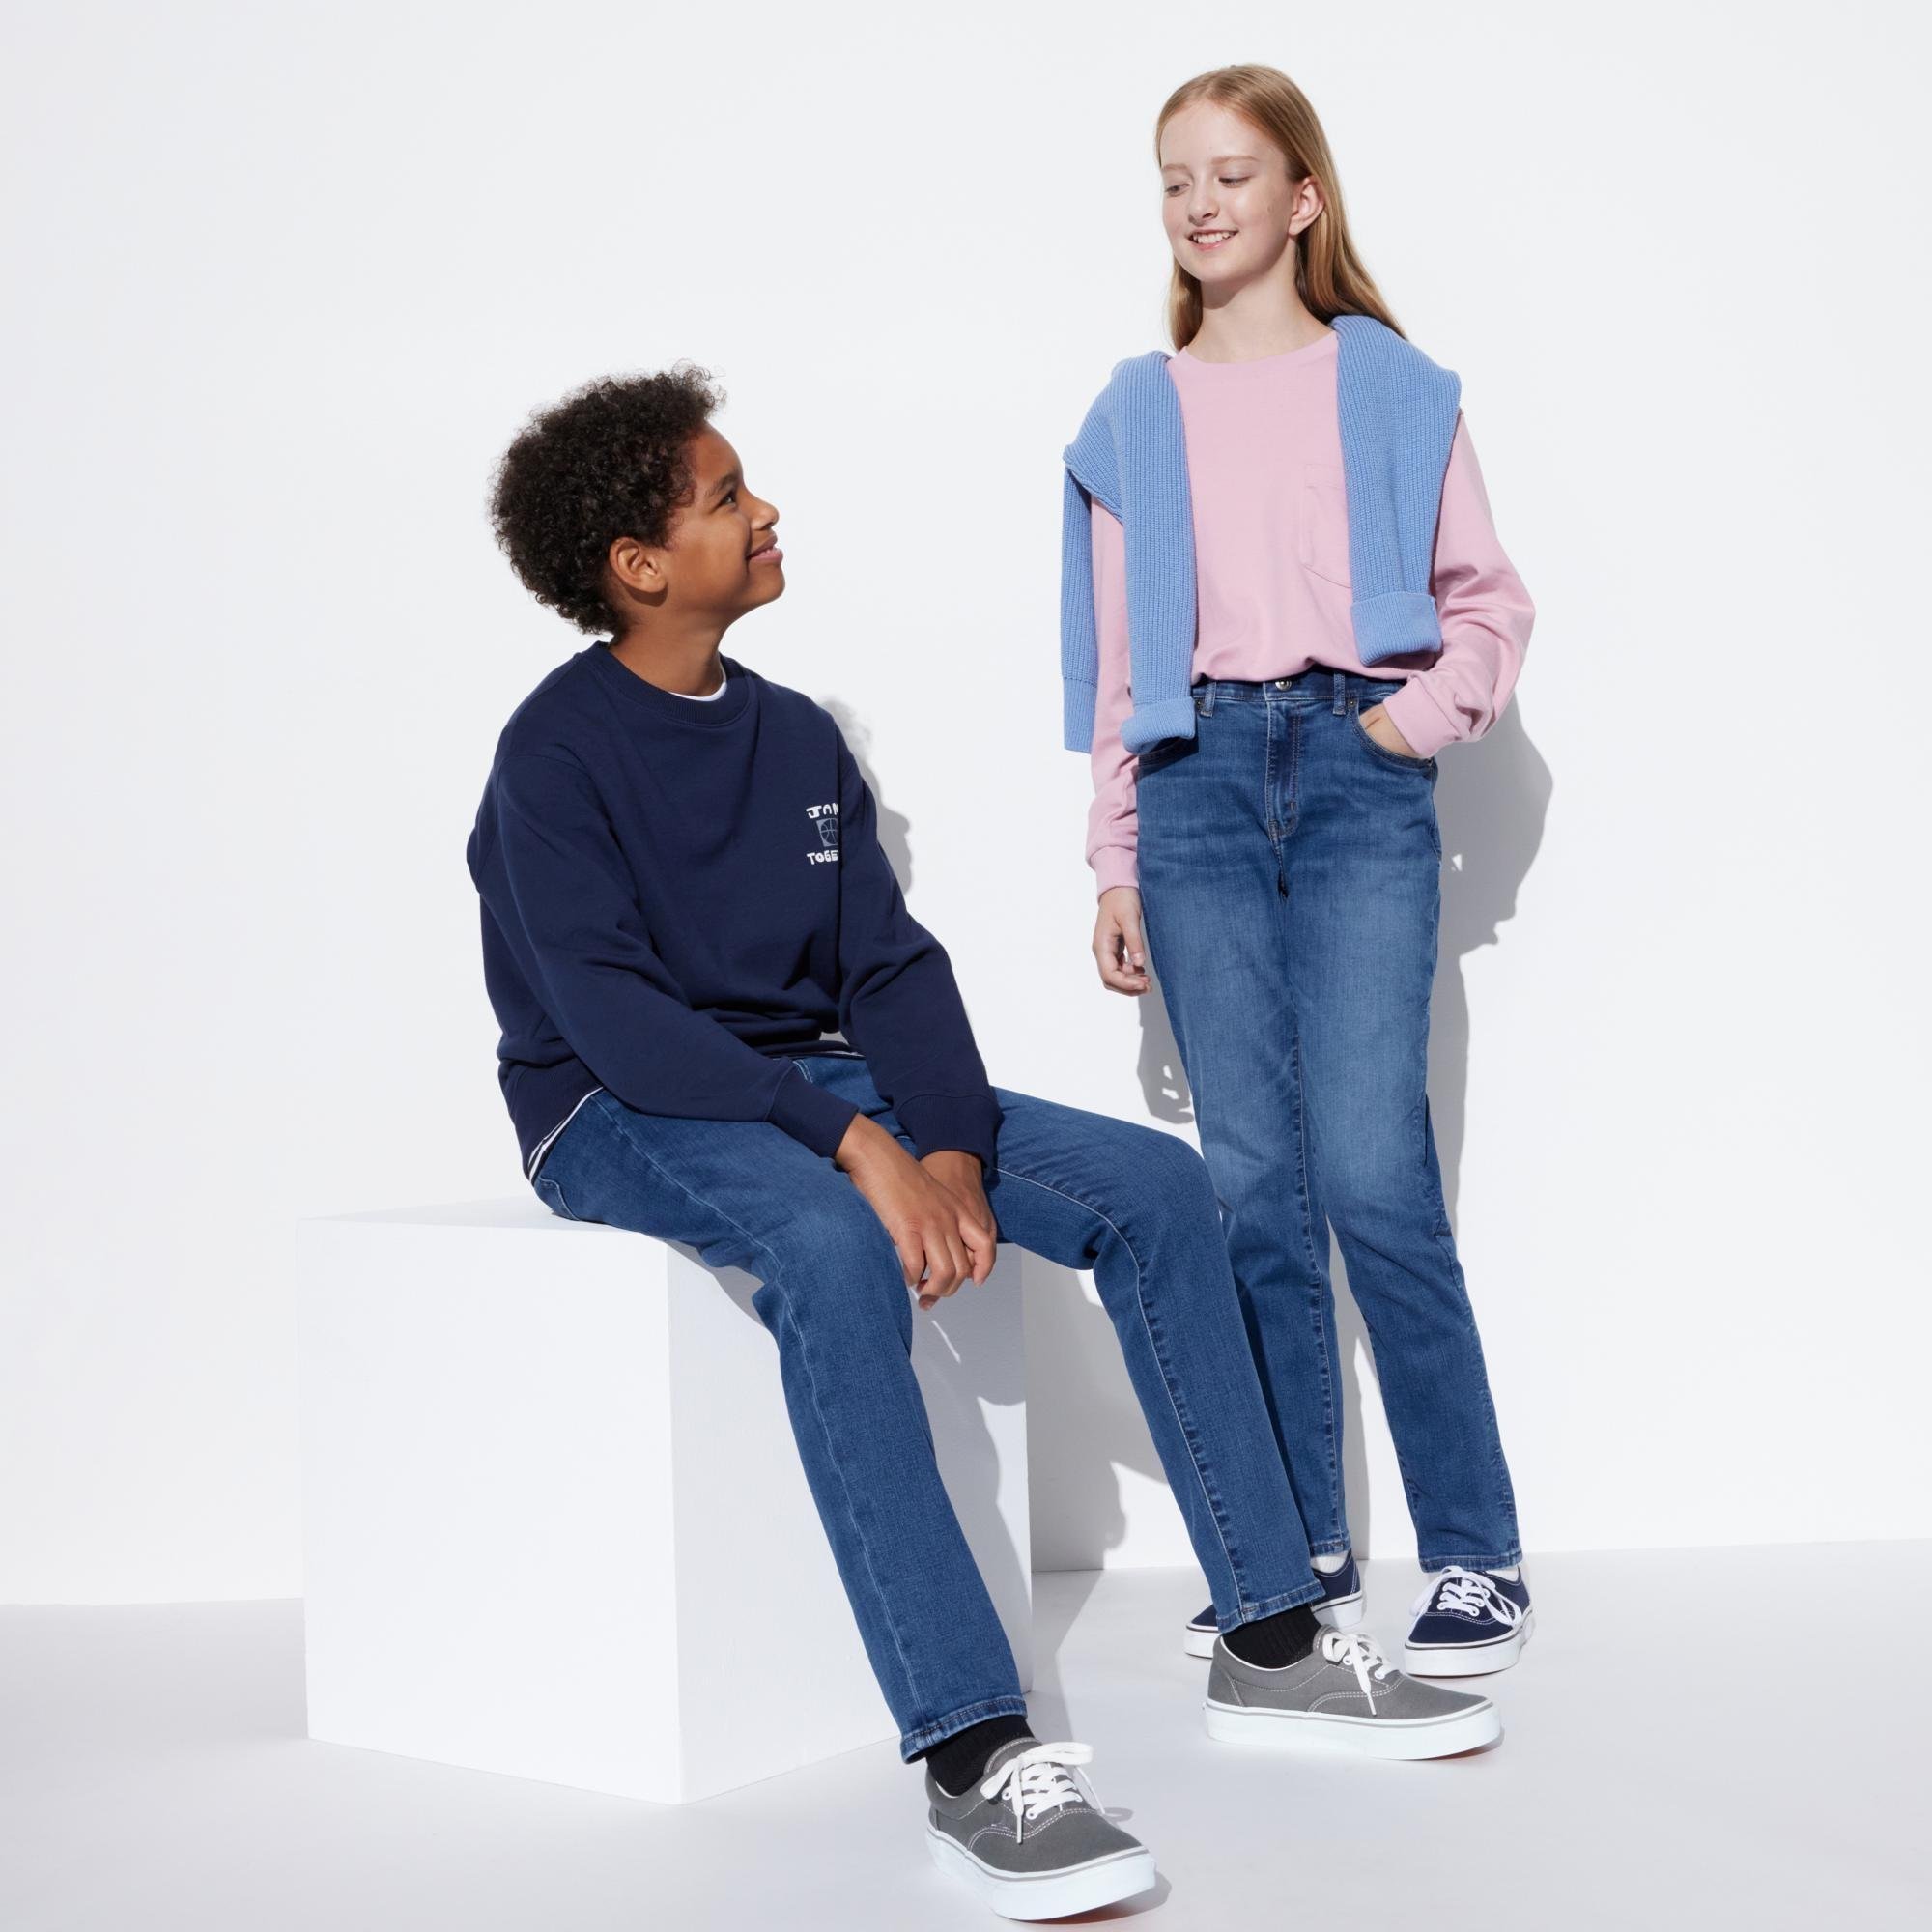 Ultra Stretch Soft Jeans by UNIQLO